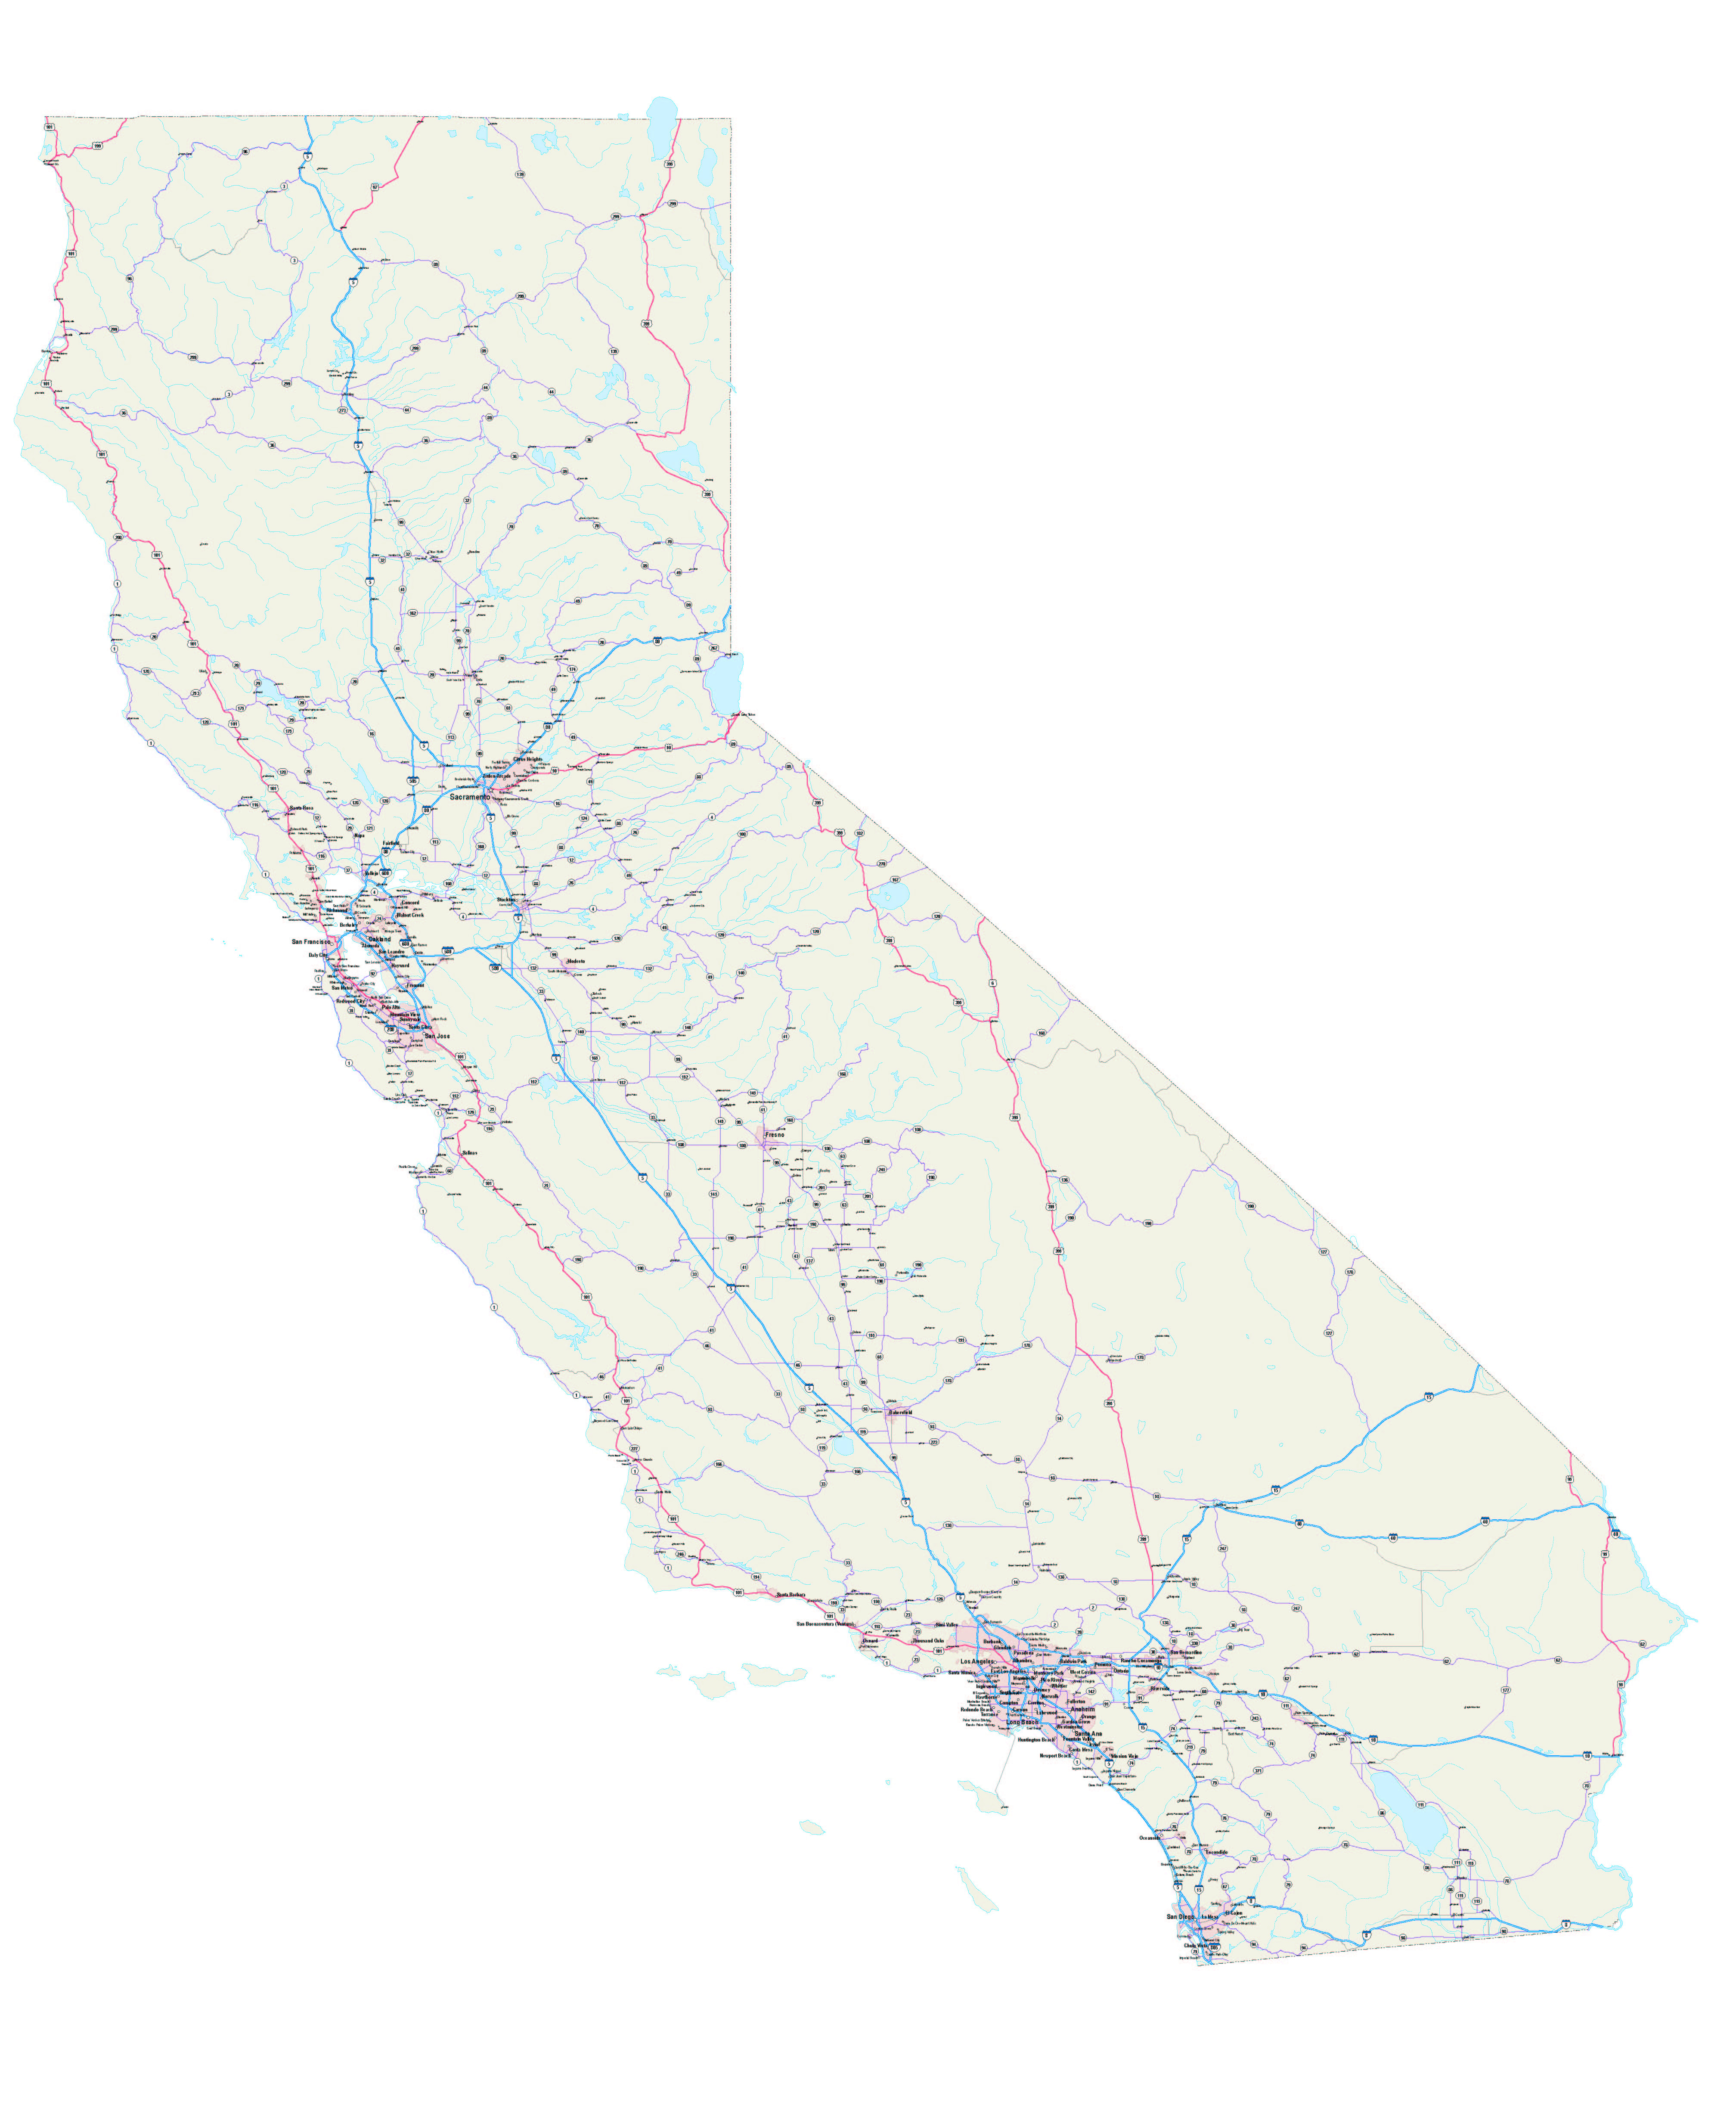 Southern California Airports Map Best Of California Map Free - Best California Road Map